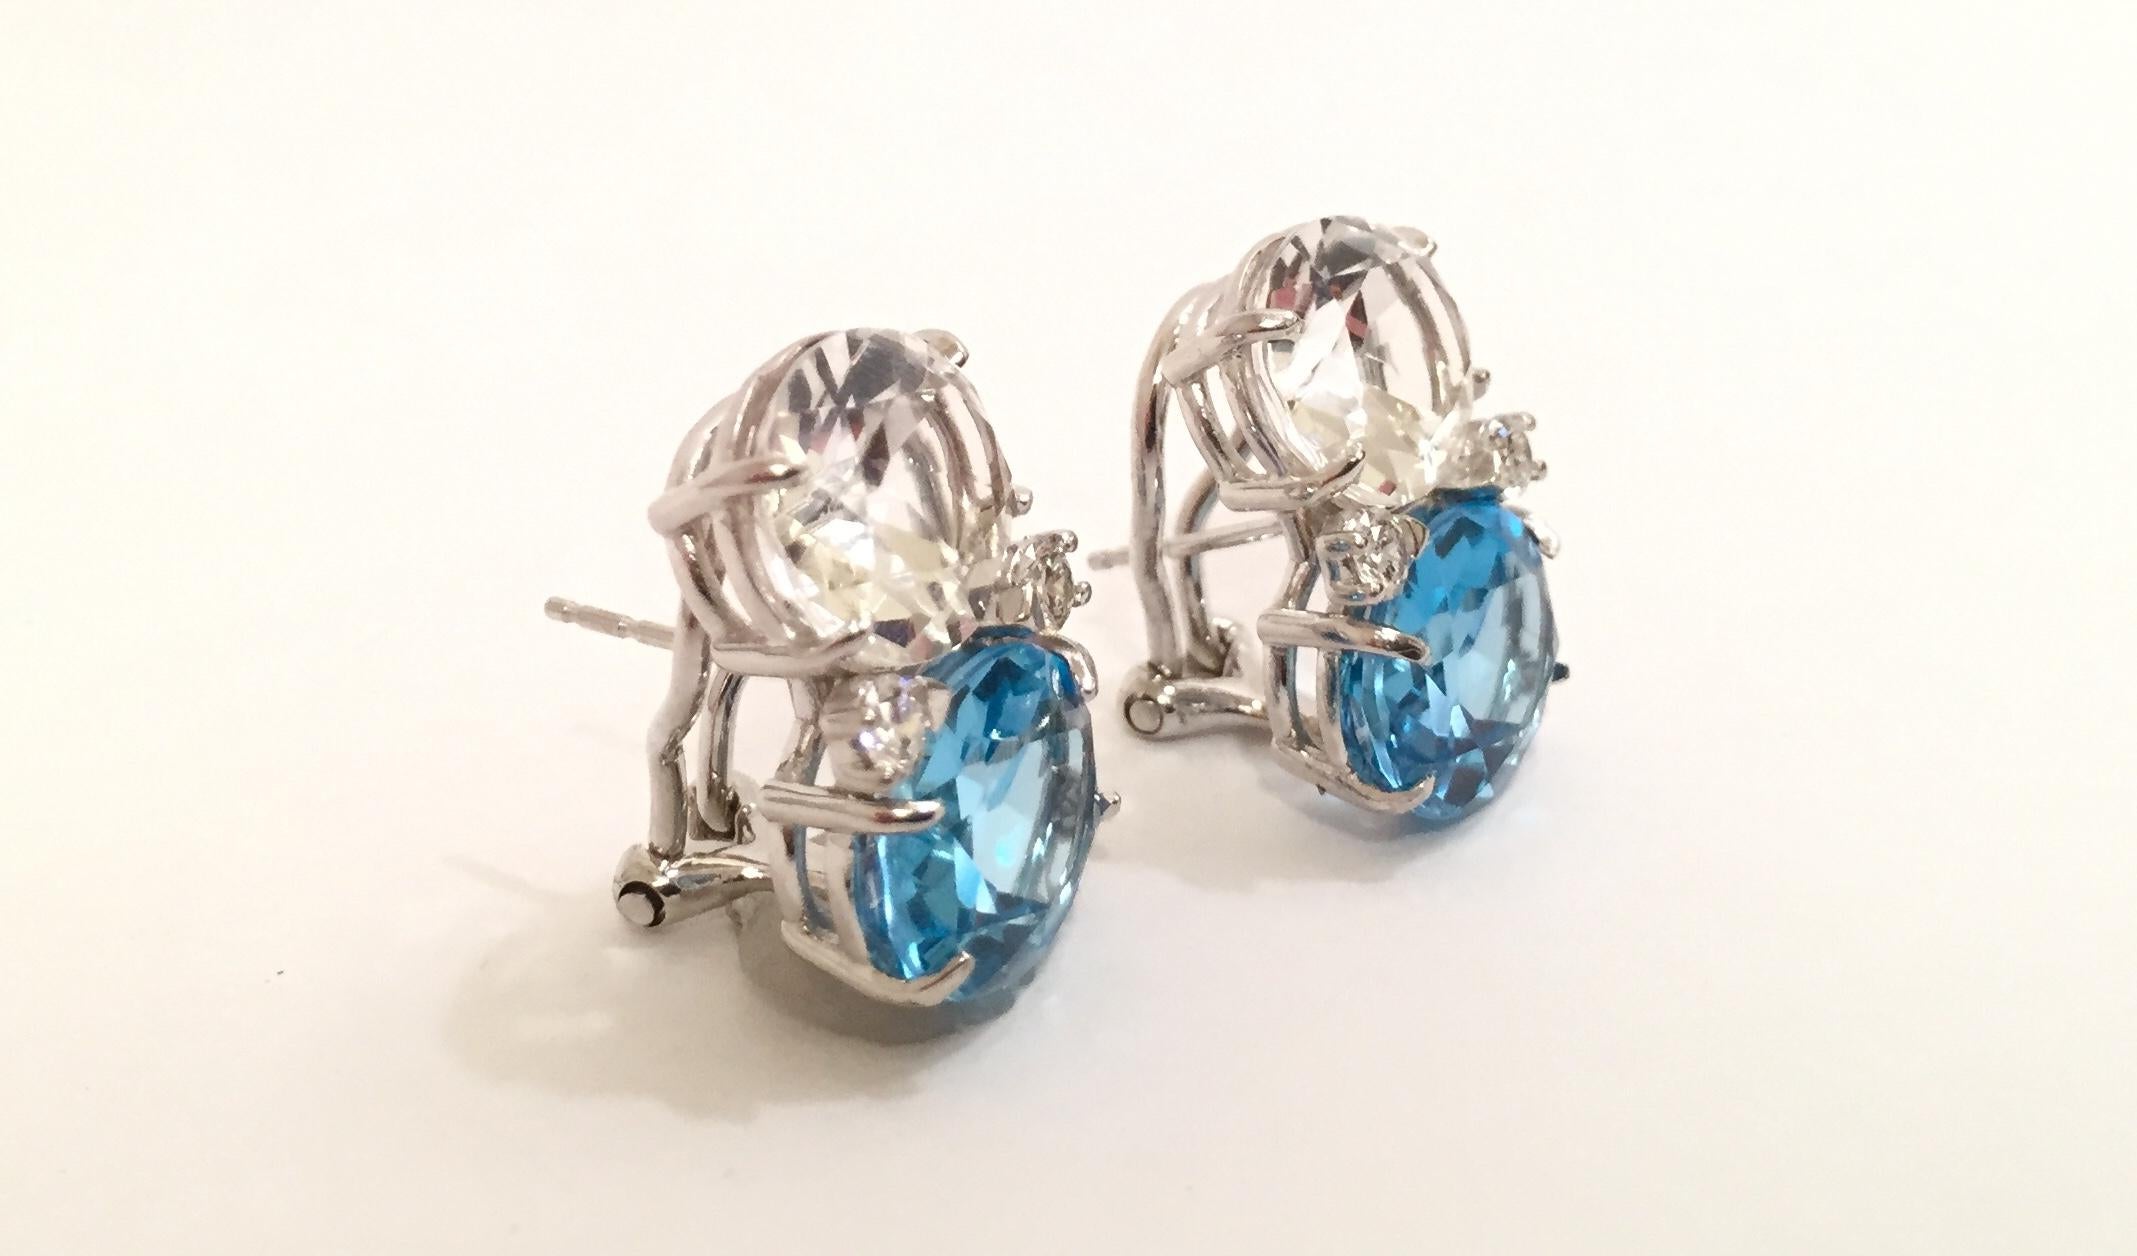 18kt Medium White Gold GUM DROP™ Earrings with Rock Crystal and Blue Topaz and four Diamonds.

The Medium 18kt White Gold GUM DROP™ earrings host faceted oval Rock Crystal (approximately 2.5 cts each) and Blue Topaz (approximately 5 cts each) and 4